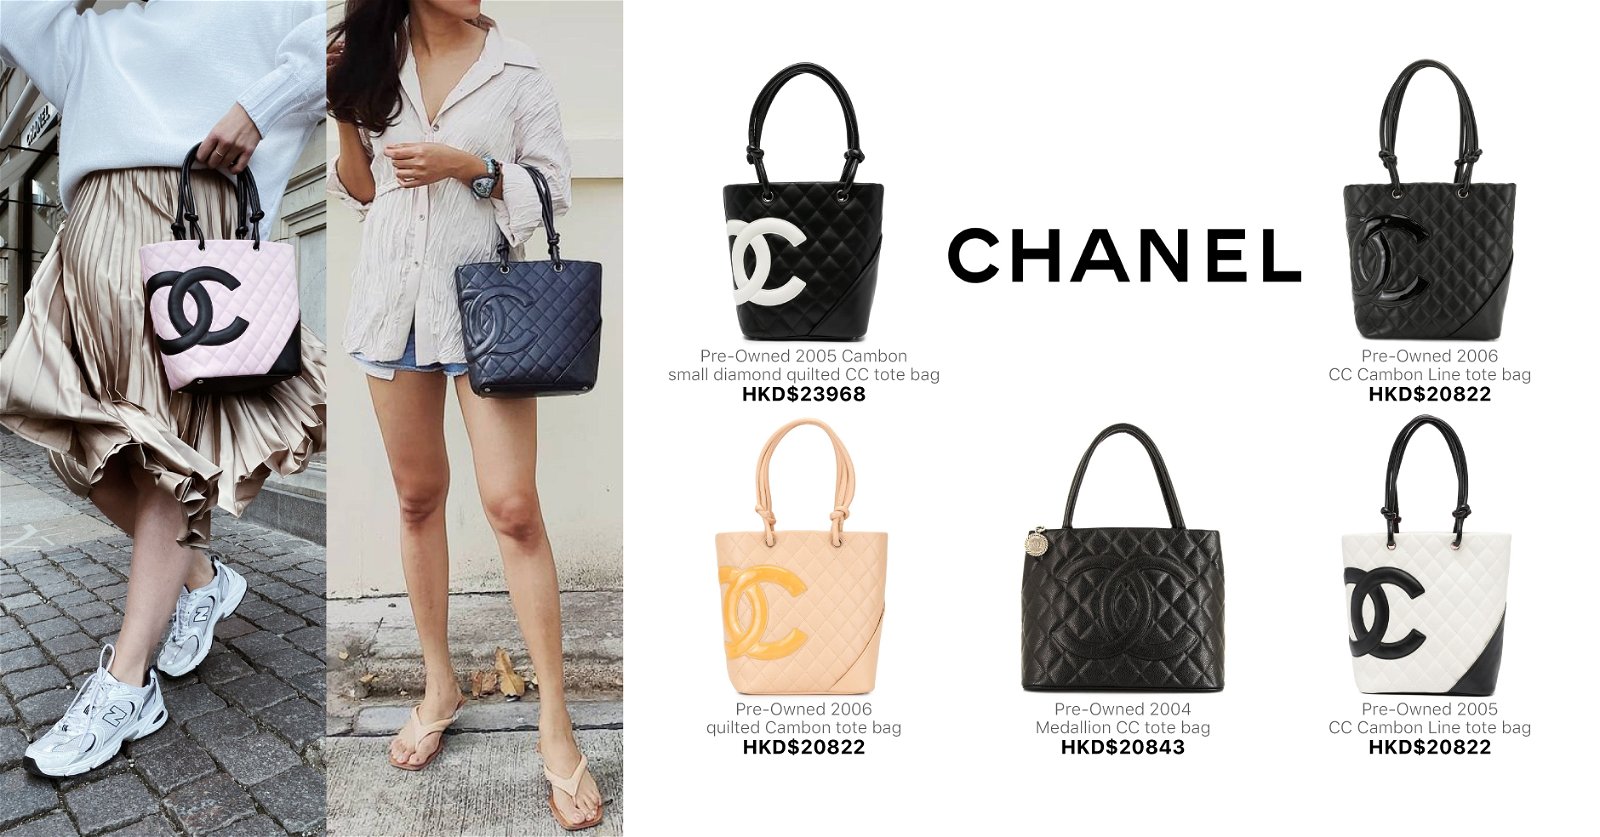 CHANEL Pre-Owned 2006 High Summer CC Tote Bag - Farfetch